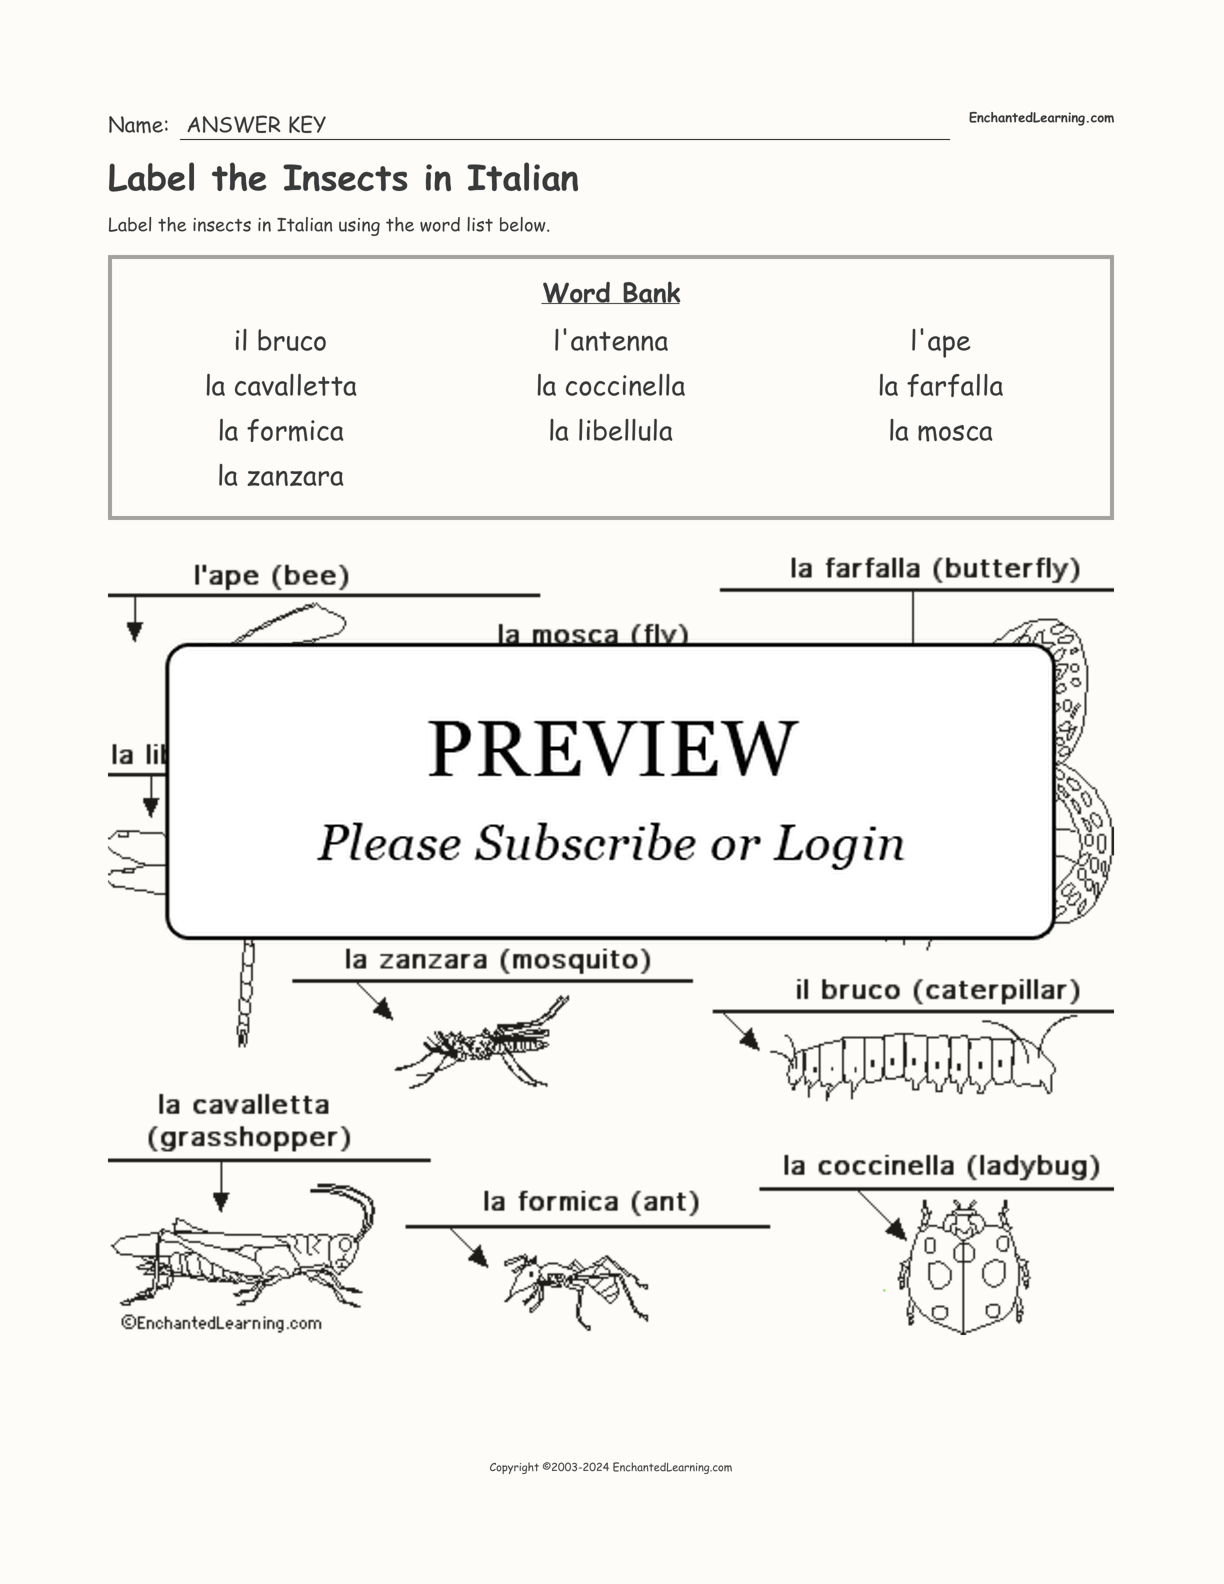 Label the Insects in Italian interactive worksheet page 2